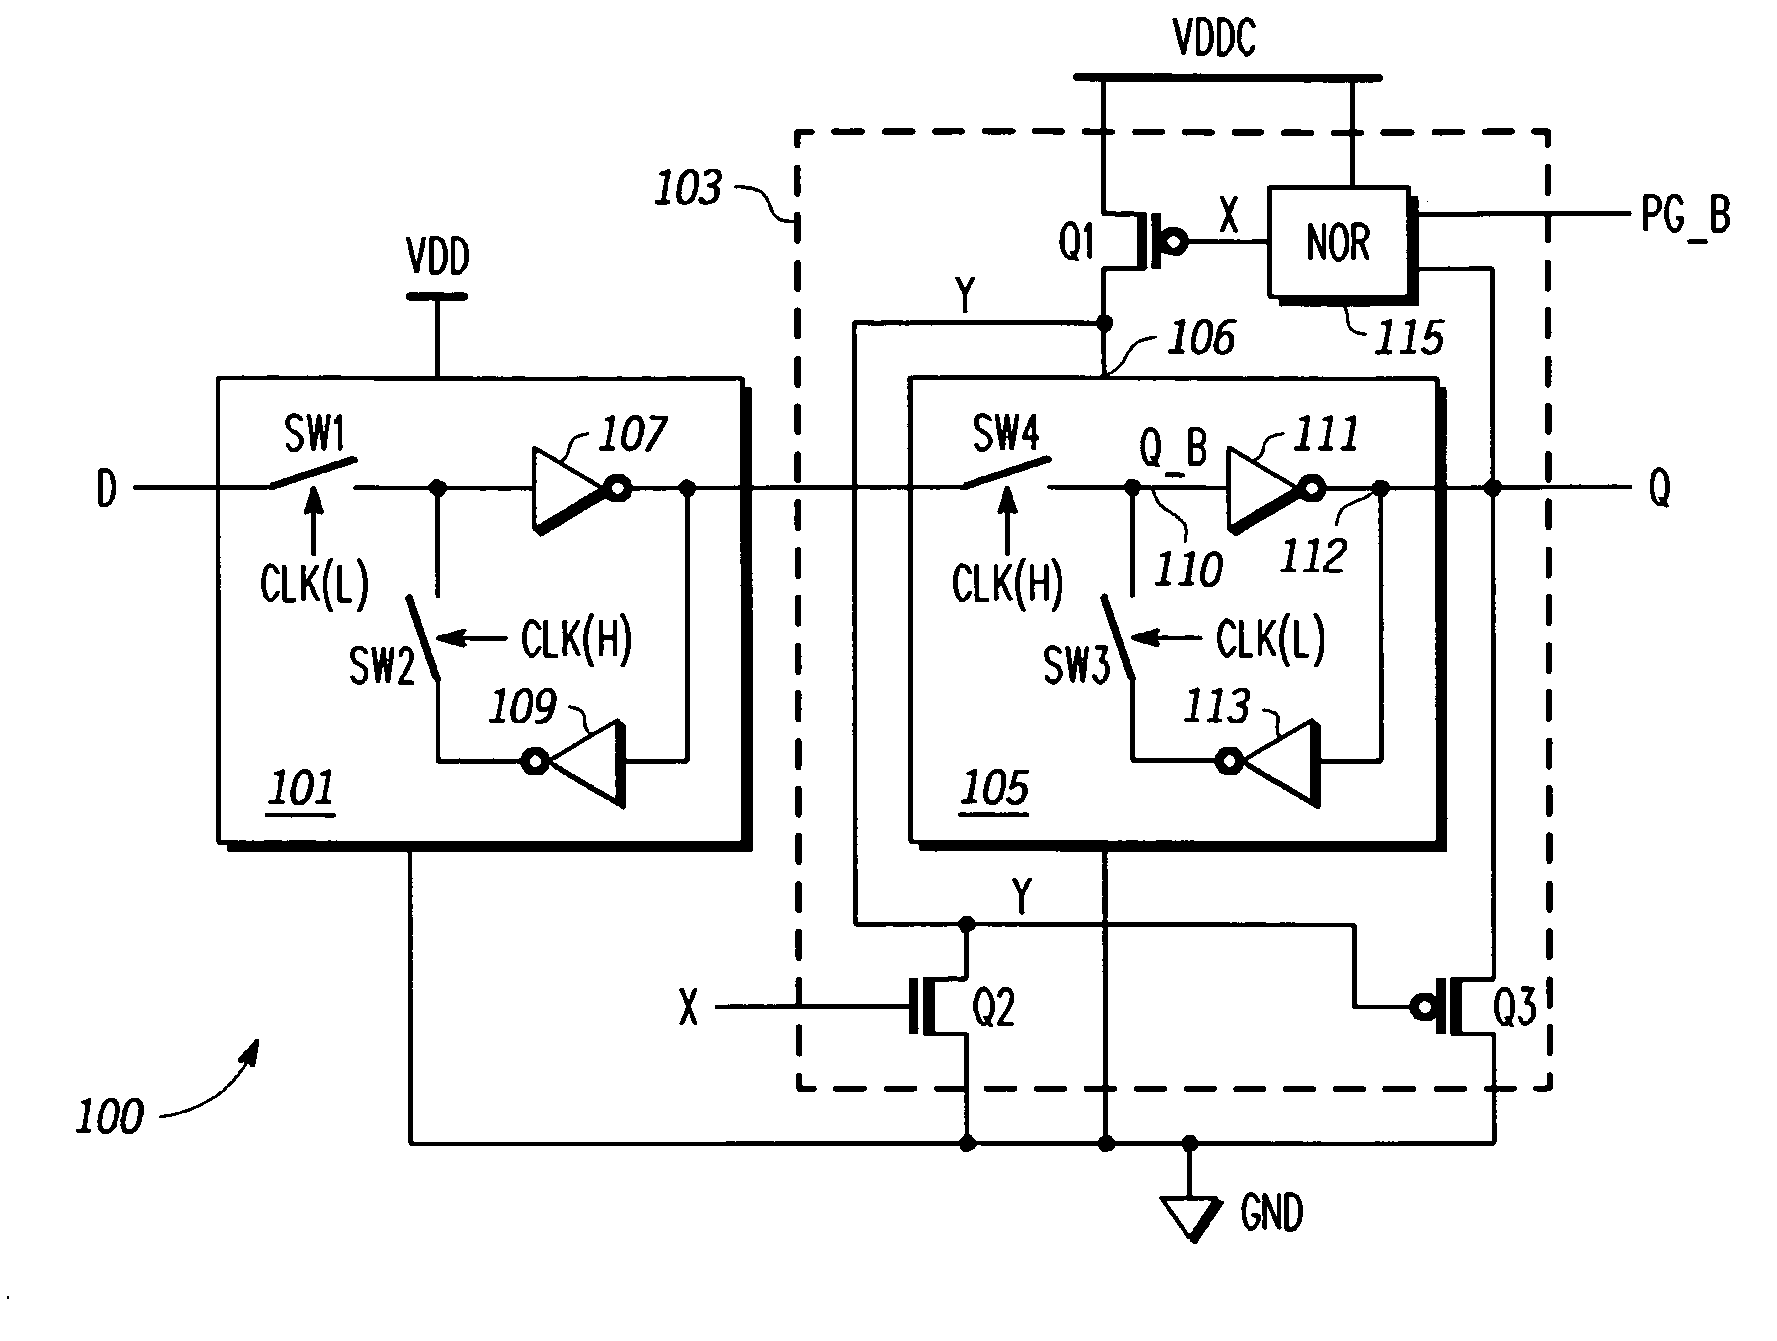 State retention power gating latch circuit